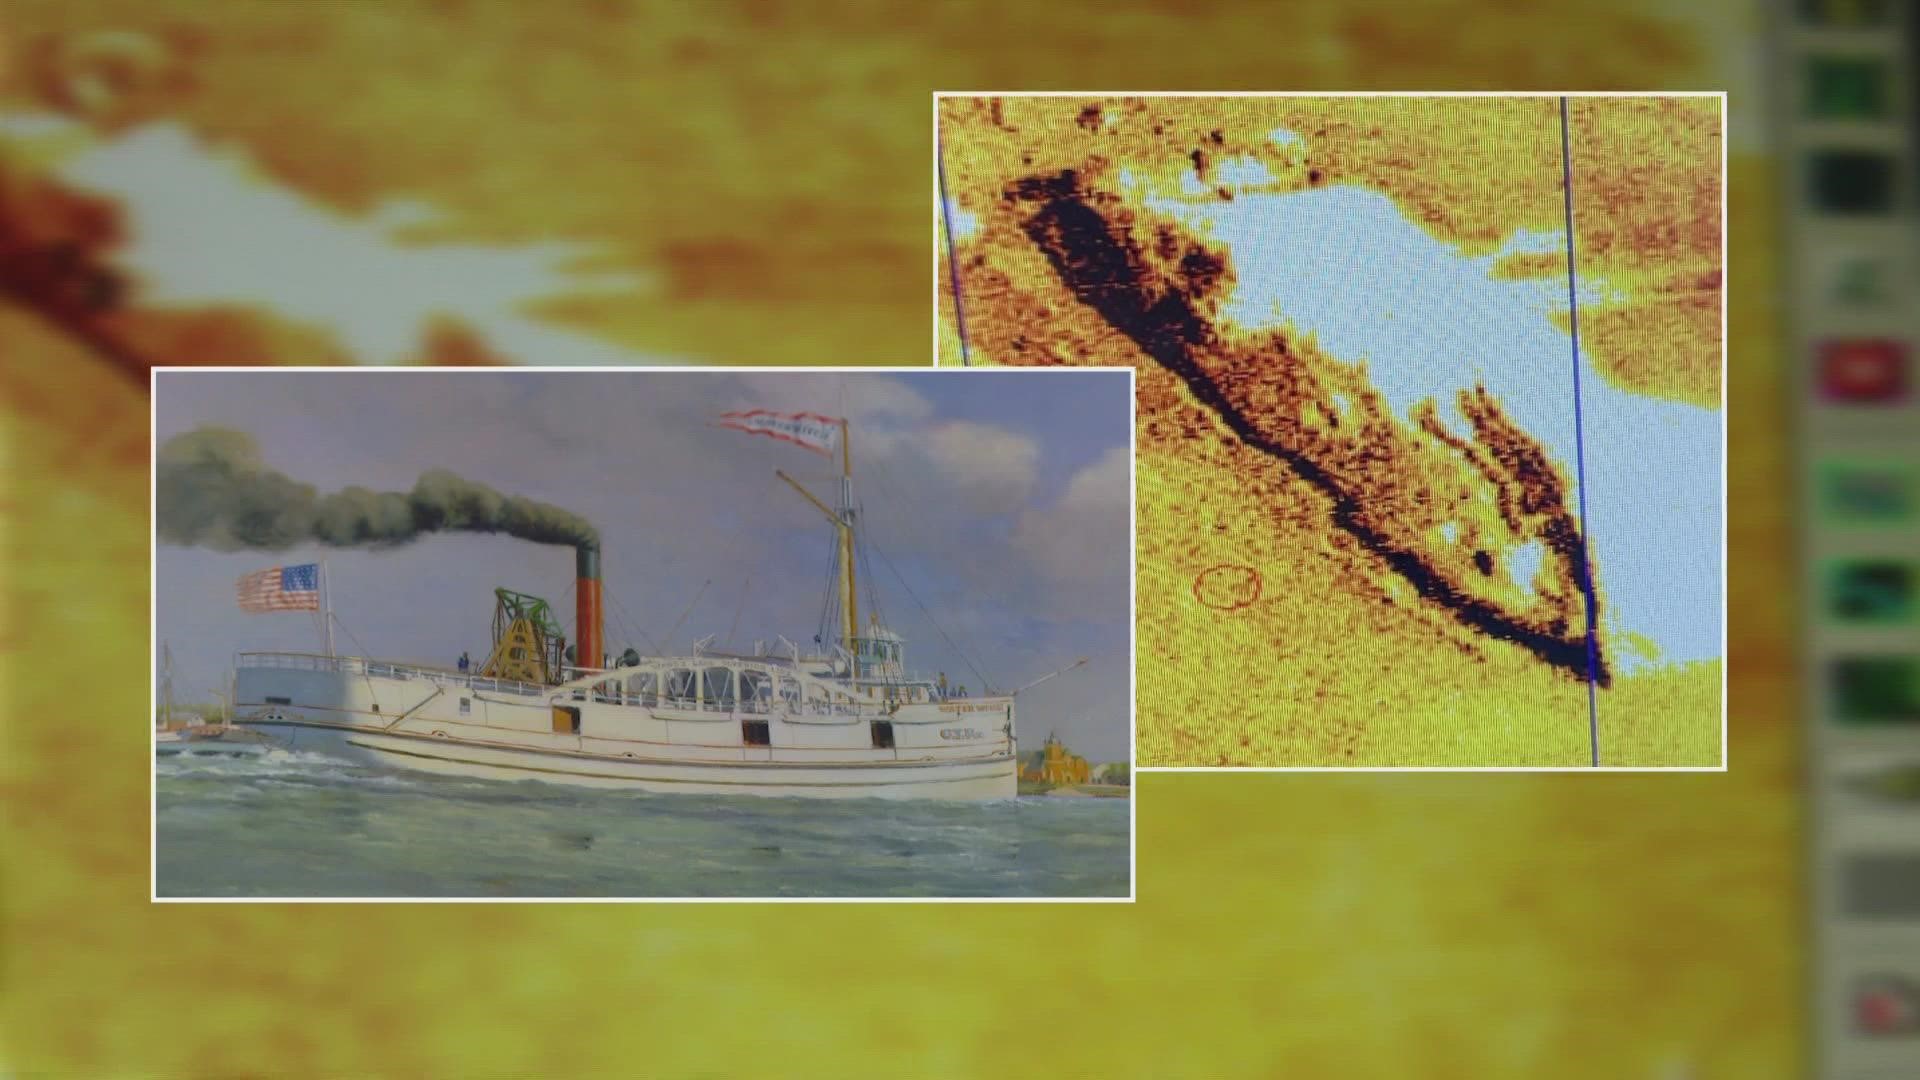 David Trotter has found over 100 Great Lakes shipwrecks in his 40 years of hunting. In June, he discovered and identified the elusive 'Water Witch' steamer.